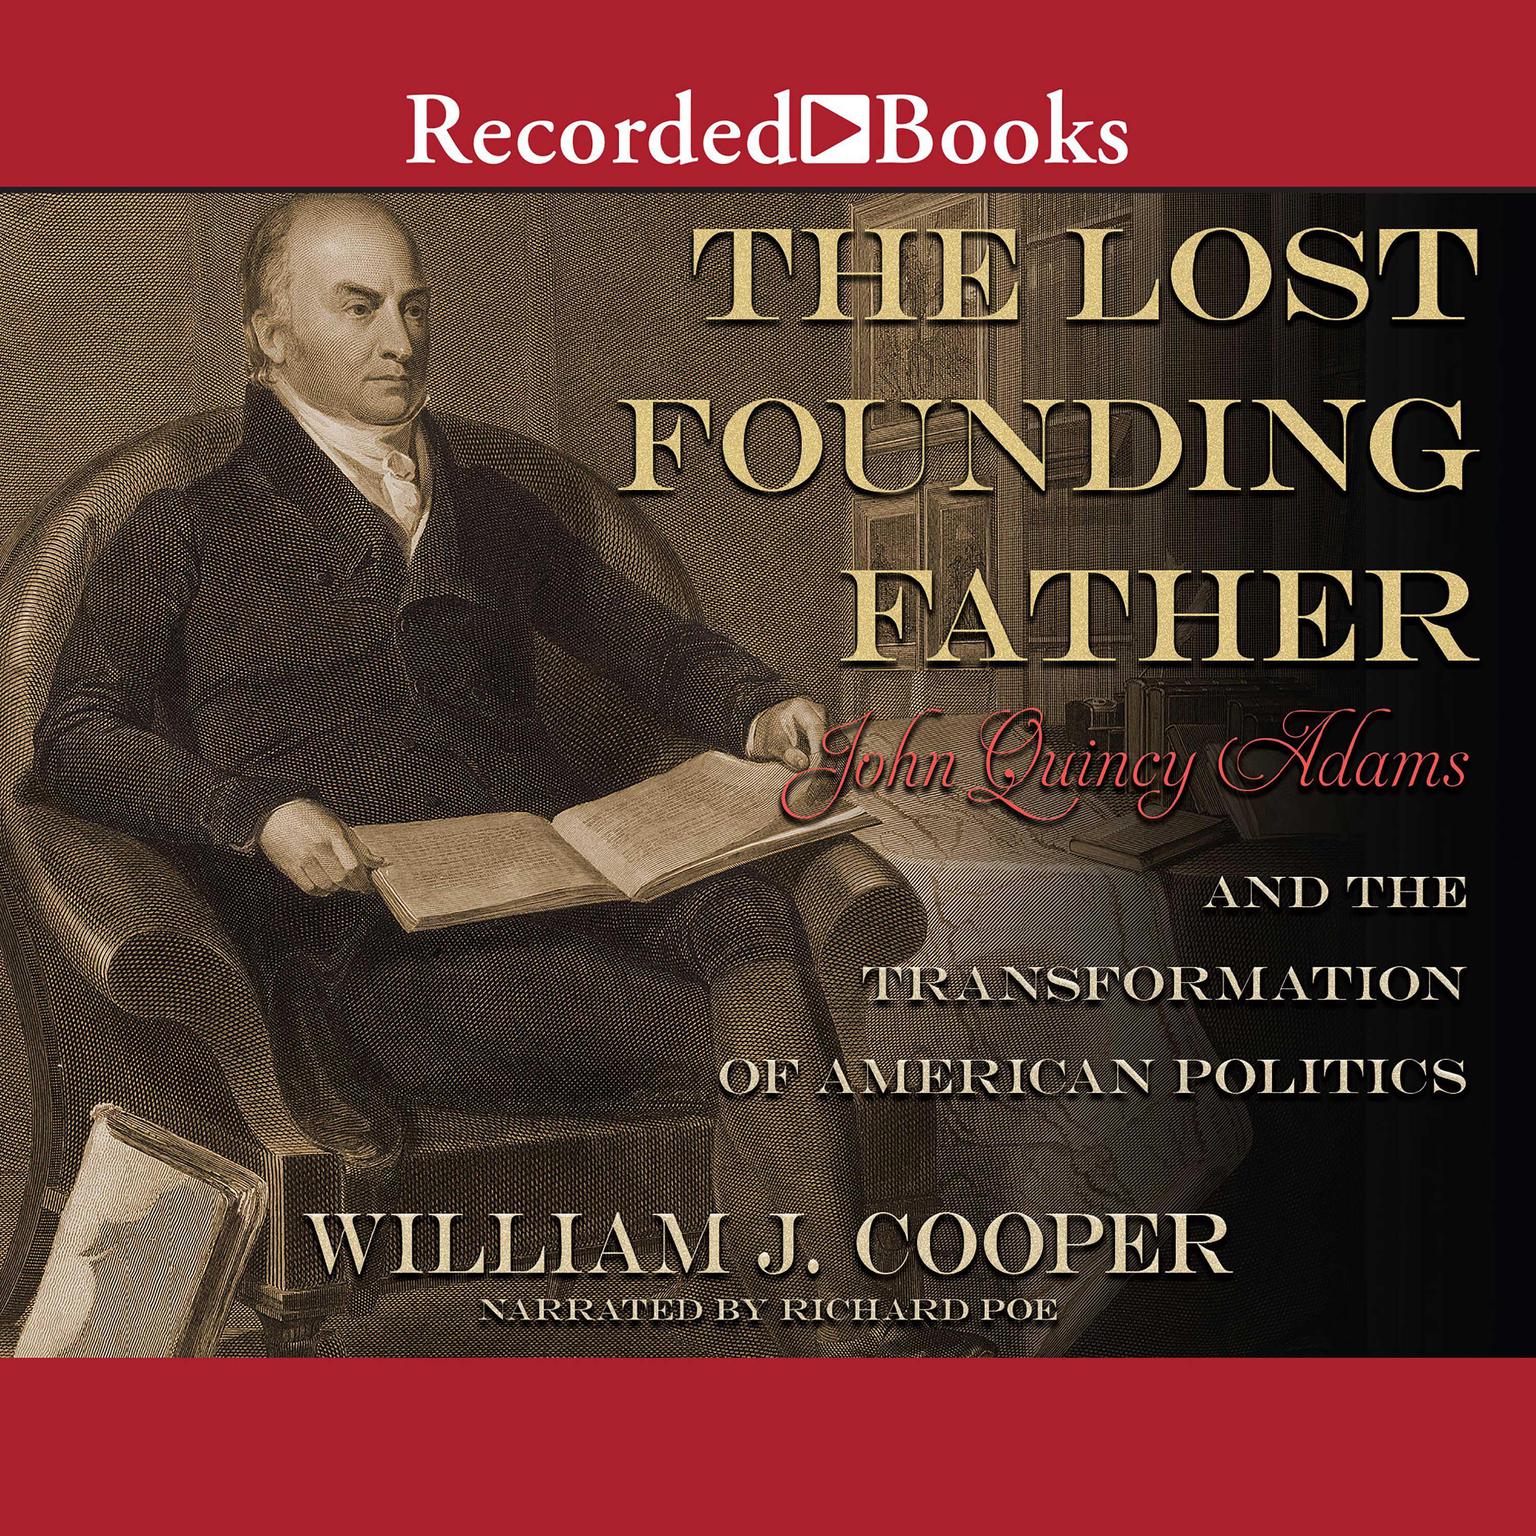 The Lost Founding Father: John Quincy Adams and the Transformation of American Politics Audiobook, by William J. Cooper